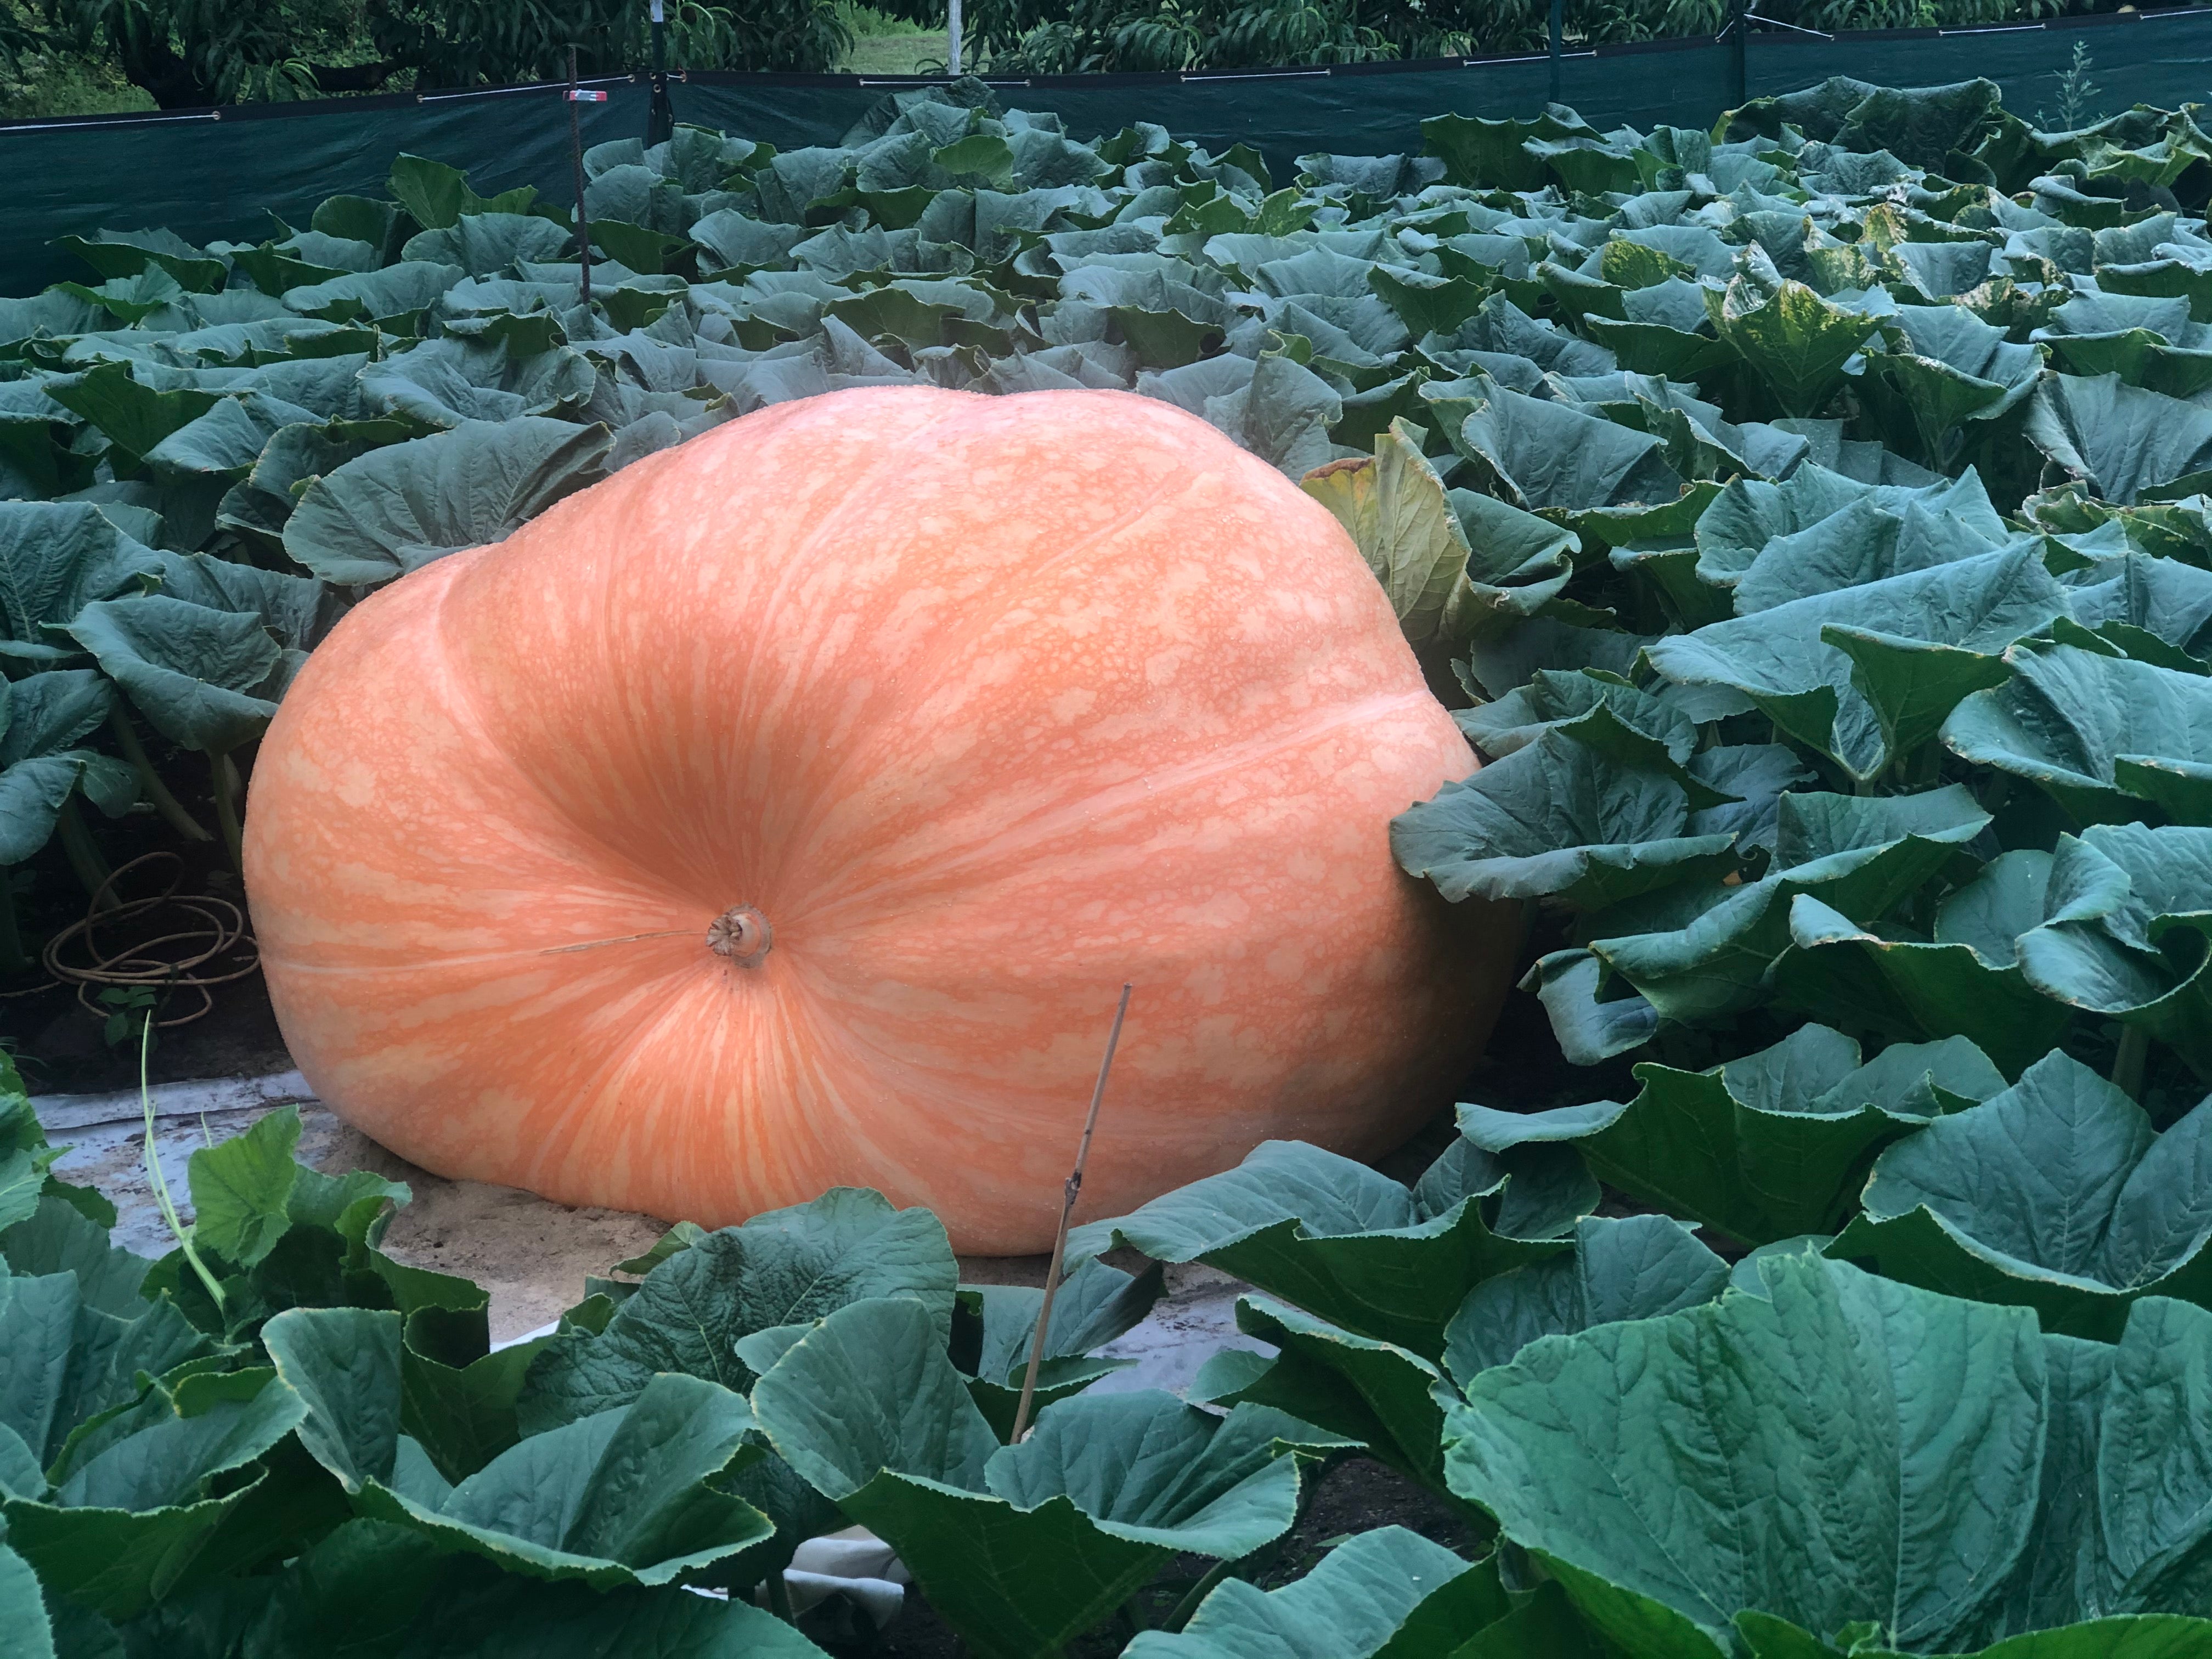 1800 pound giant pumpkin in patch